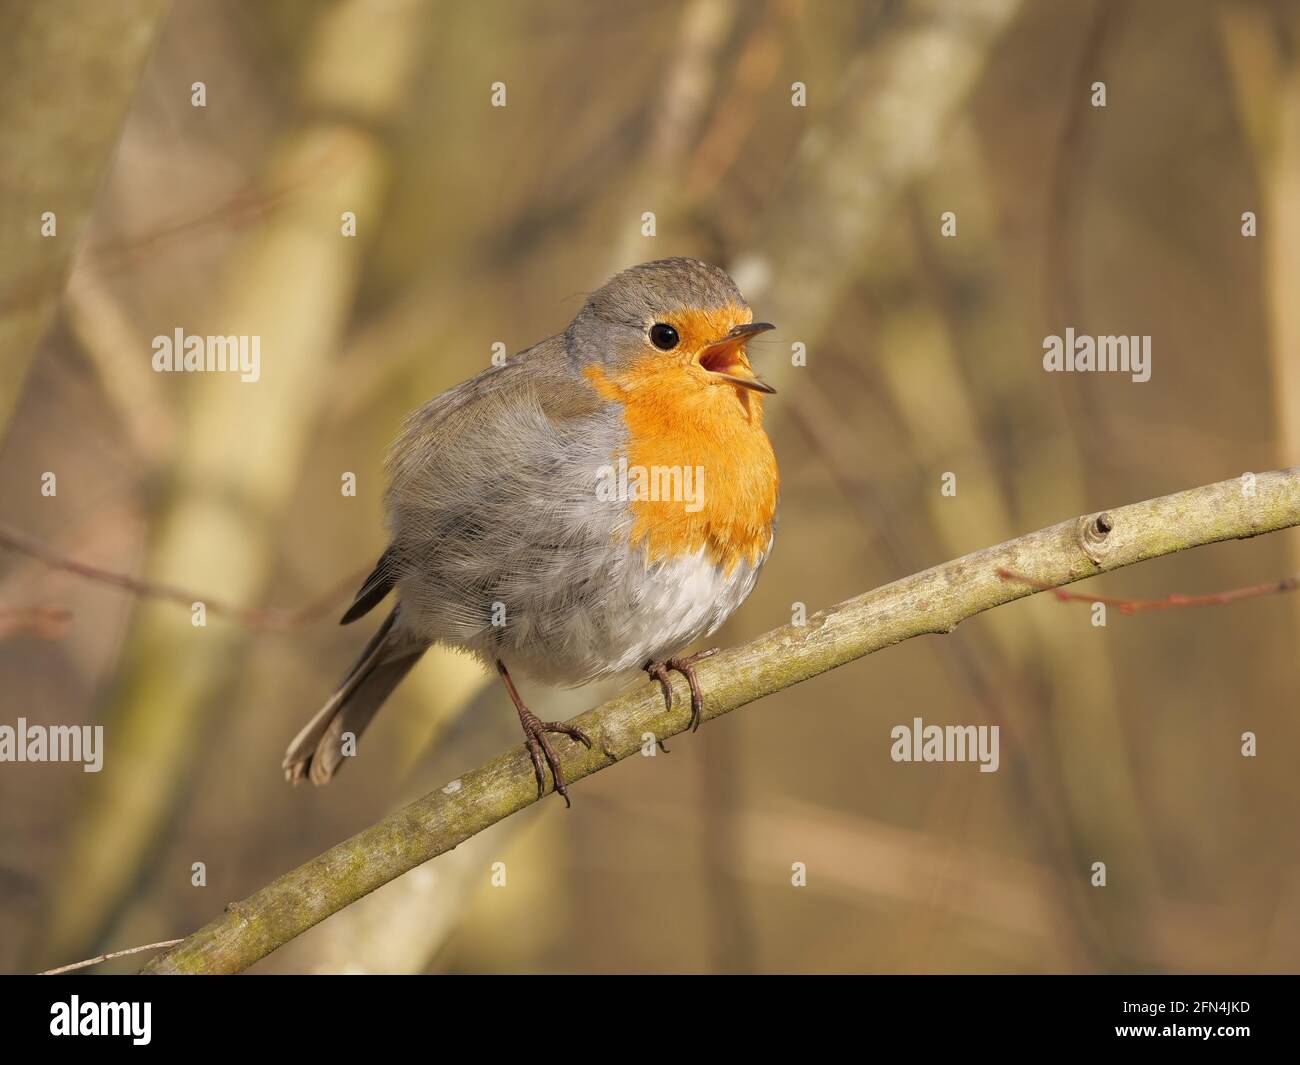 European robin with an open beak sits on a branch Stock Photo